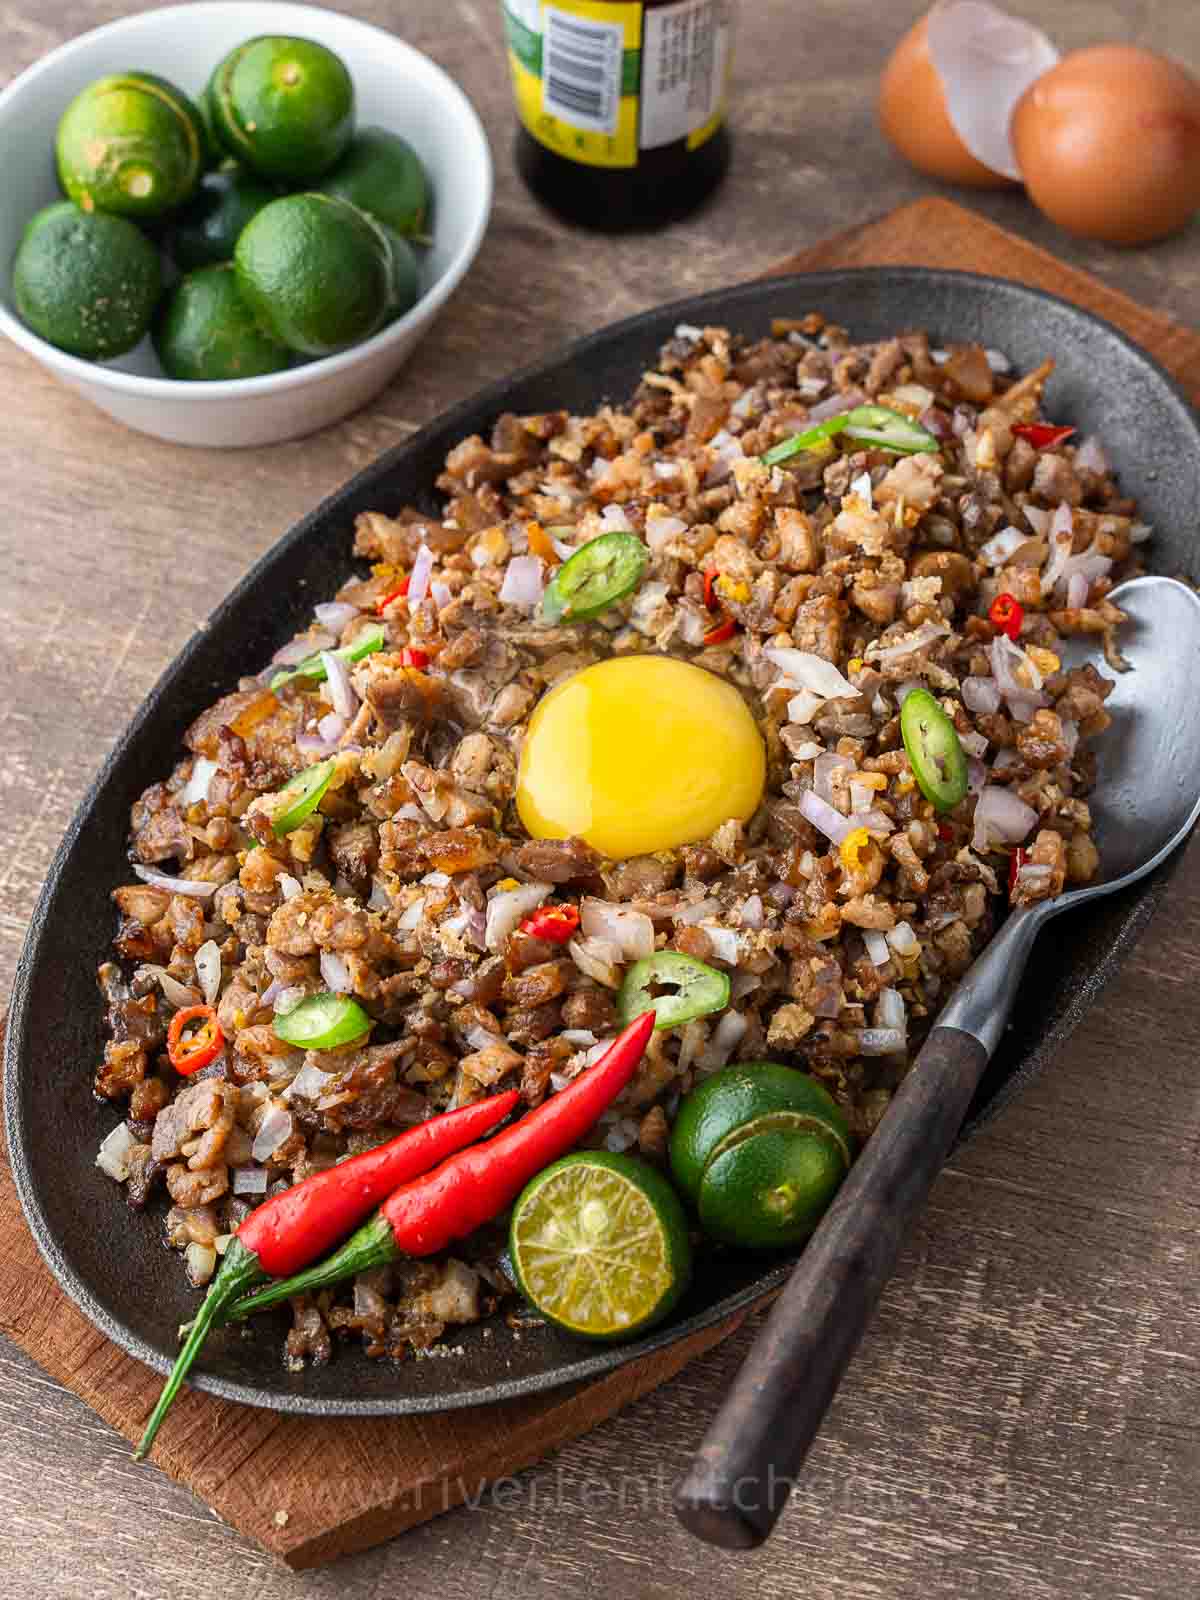 Filipino pork dish called sisig made of pork belly, onions, chilies served on a sizzling plate.